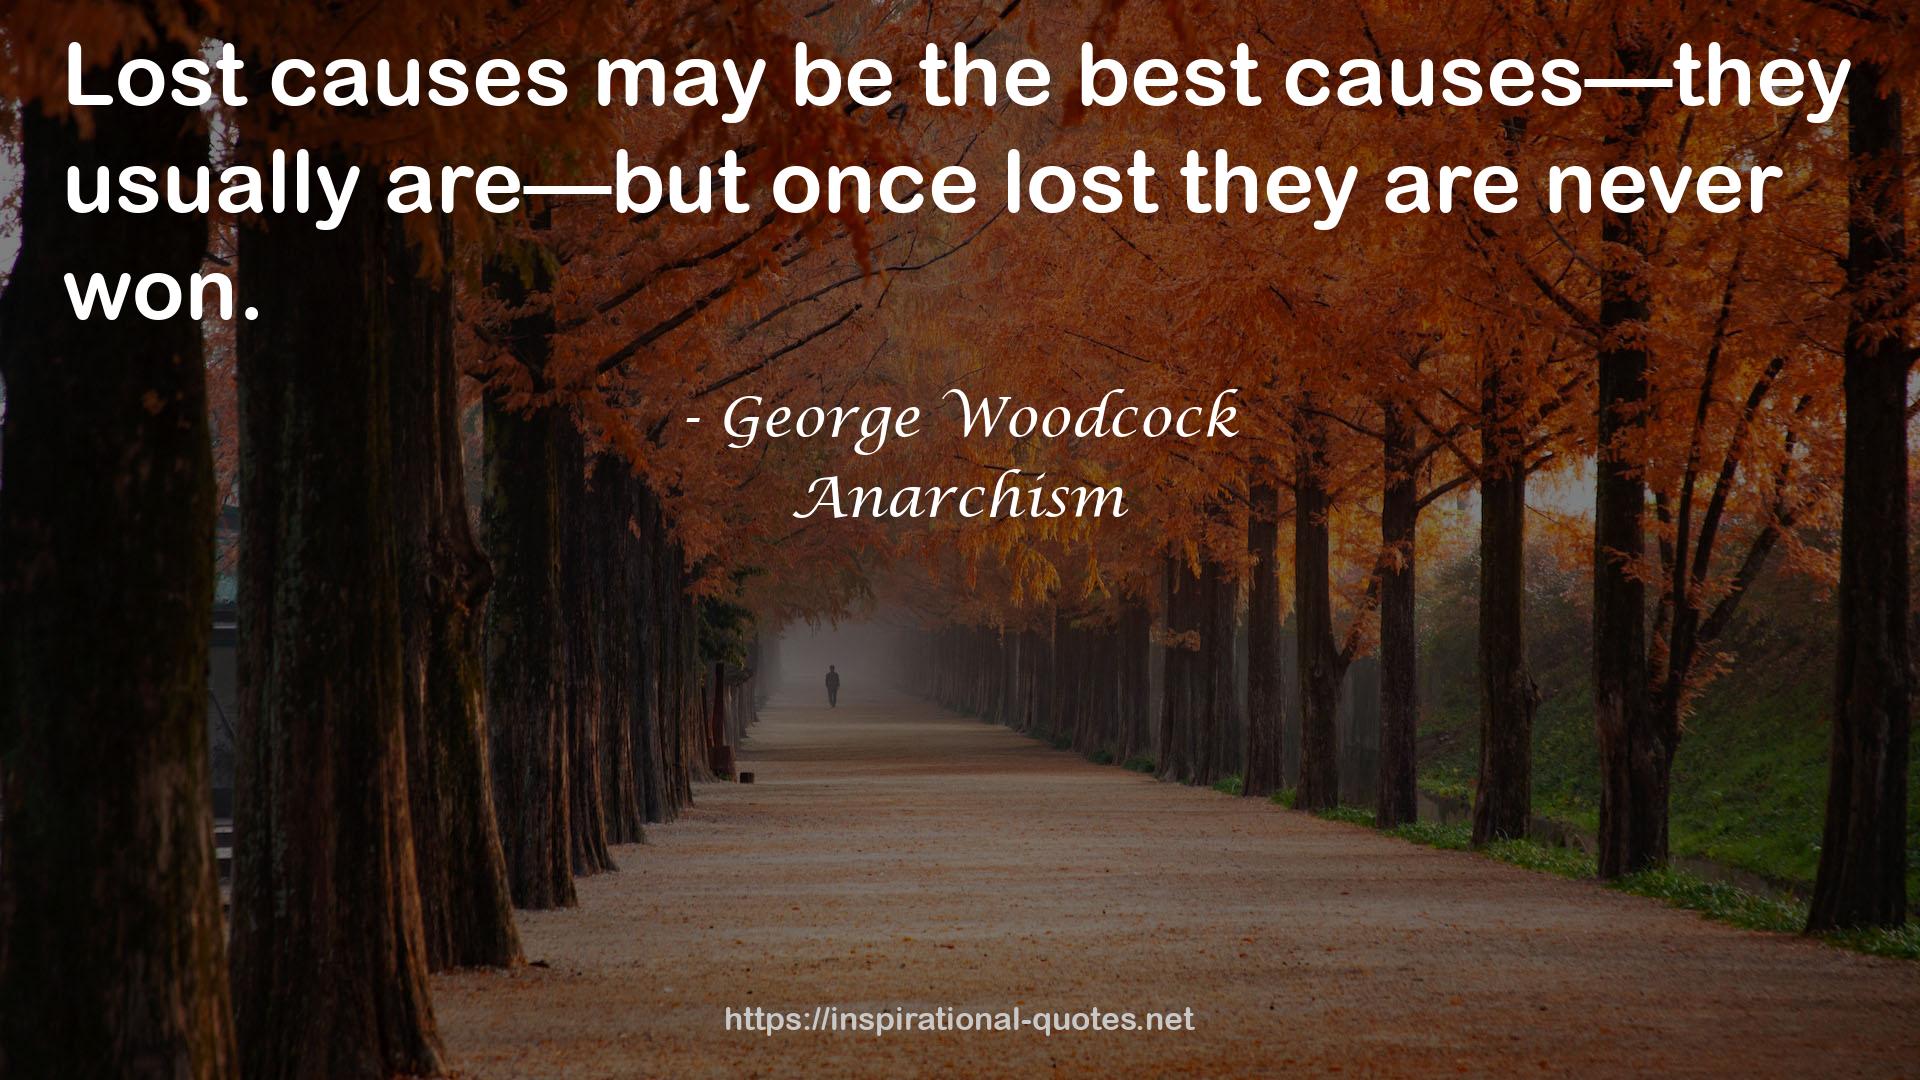 George Woodcock QUOTES